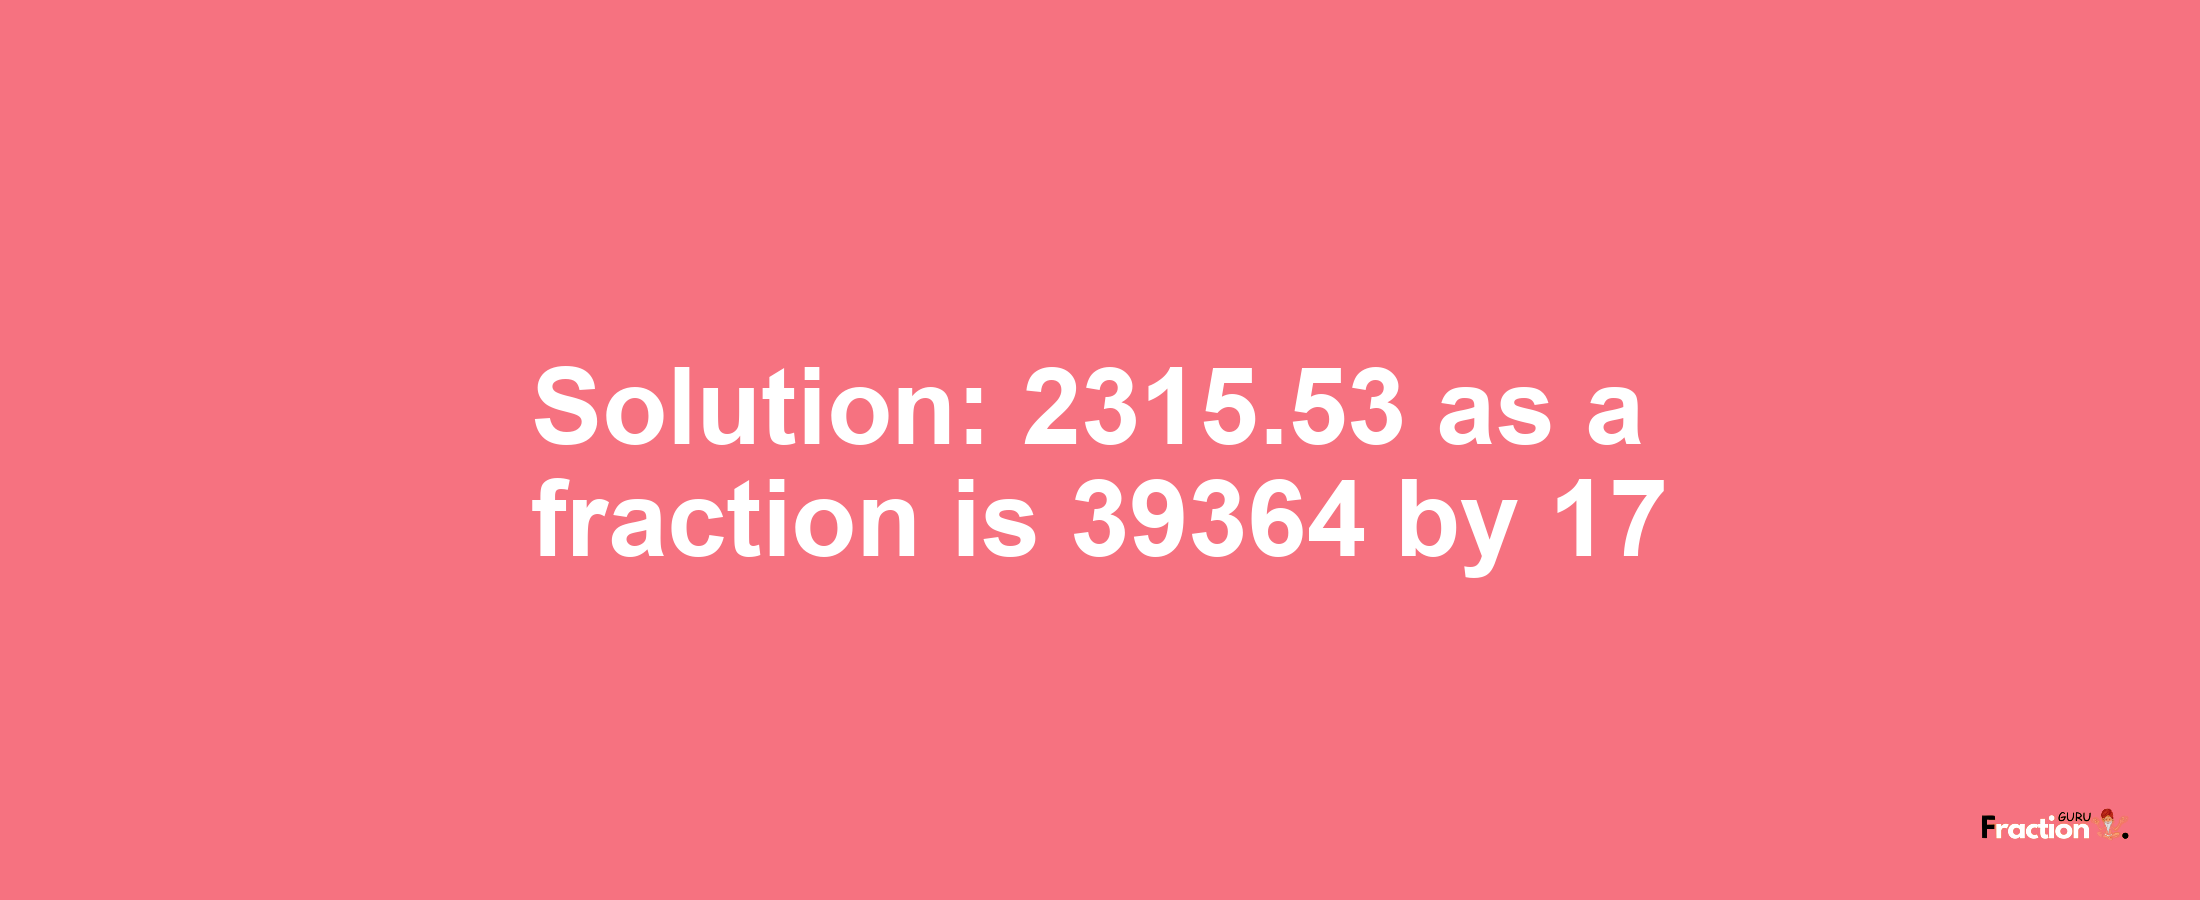 Solution:2315.53 as a fraction is 39364/17